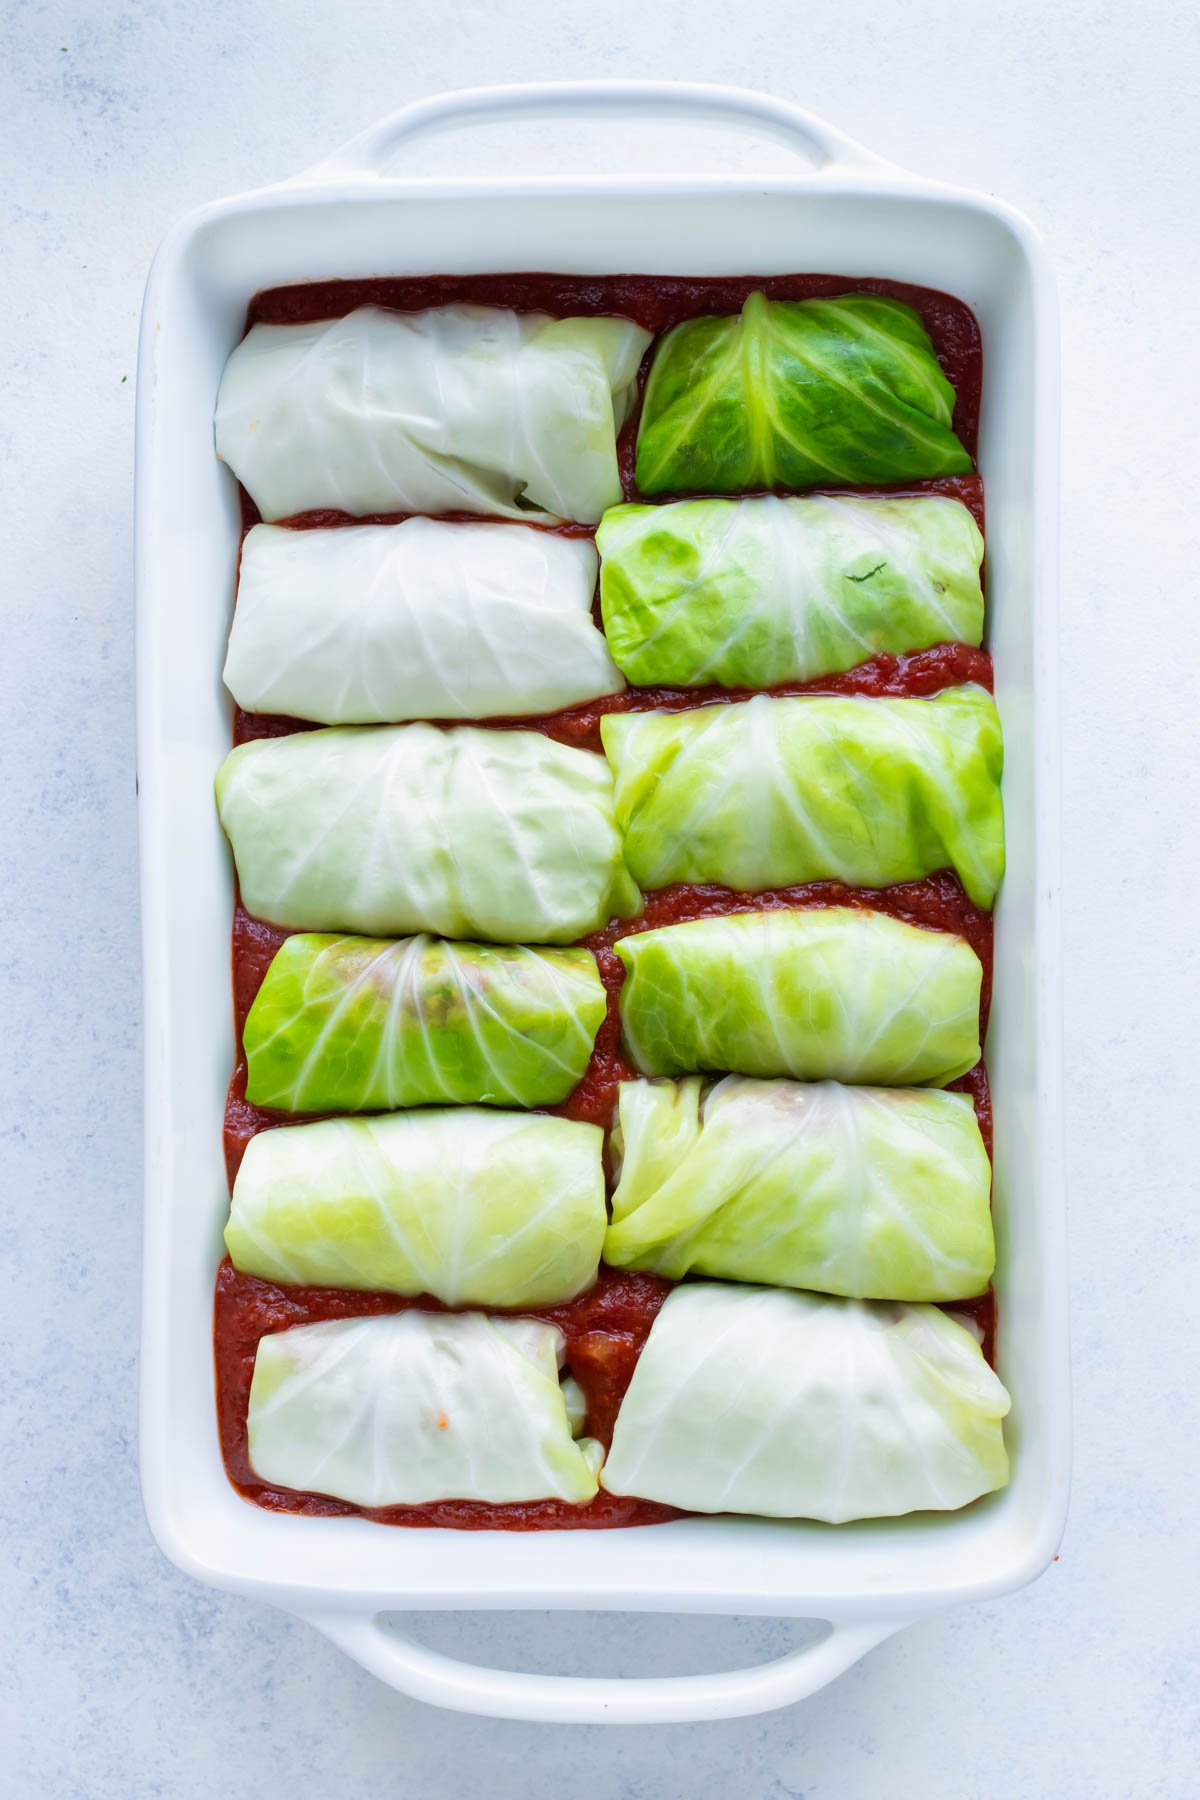 All cabbage rolls are placed seam down in the tomato sauce.